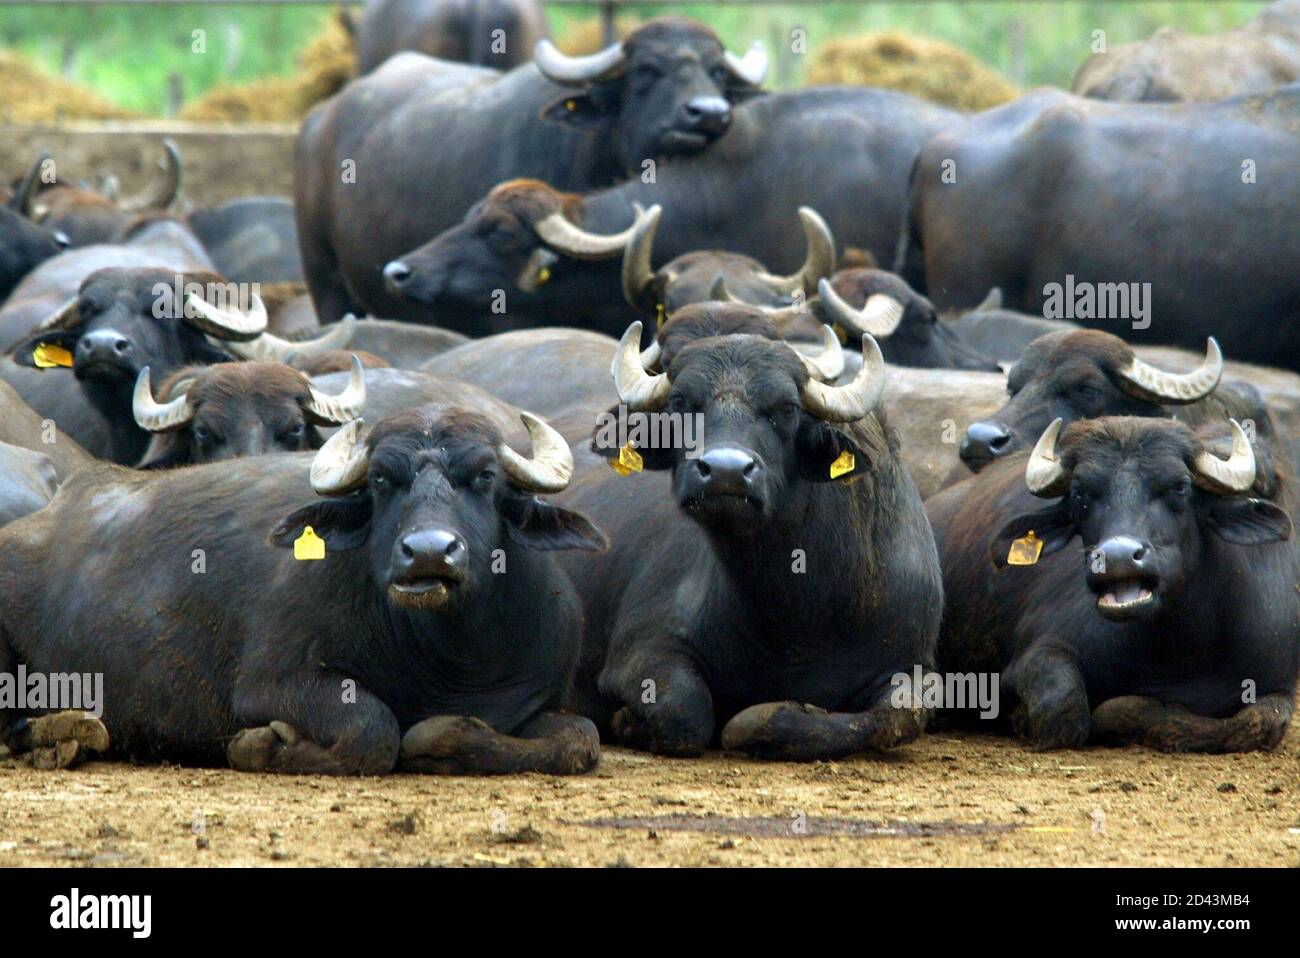 A herd of buffalo rest at 'Fierro' farm in Montegiove, southern Italy. Ten years ago, to most mozzarella simply a cheese to put on pizza, and outside of Italy